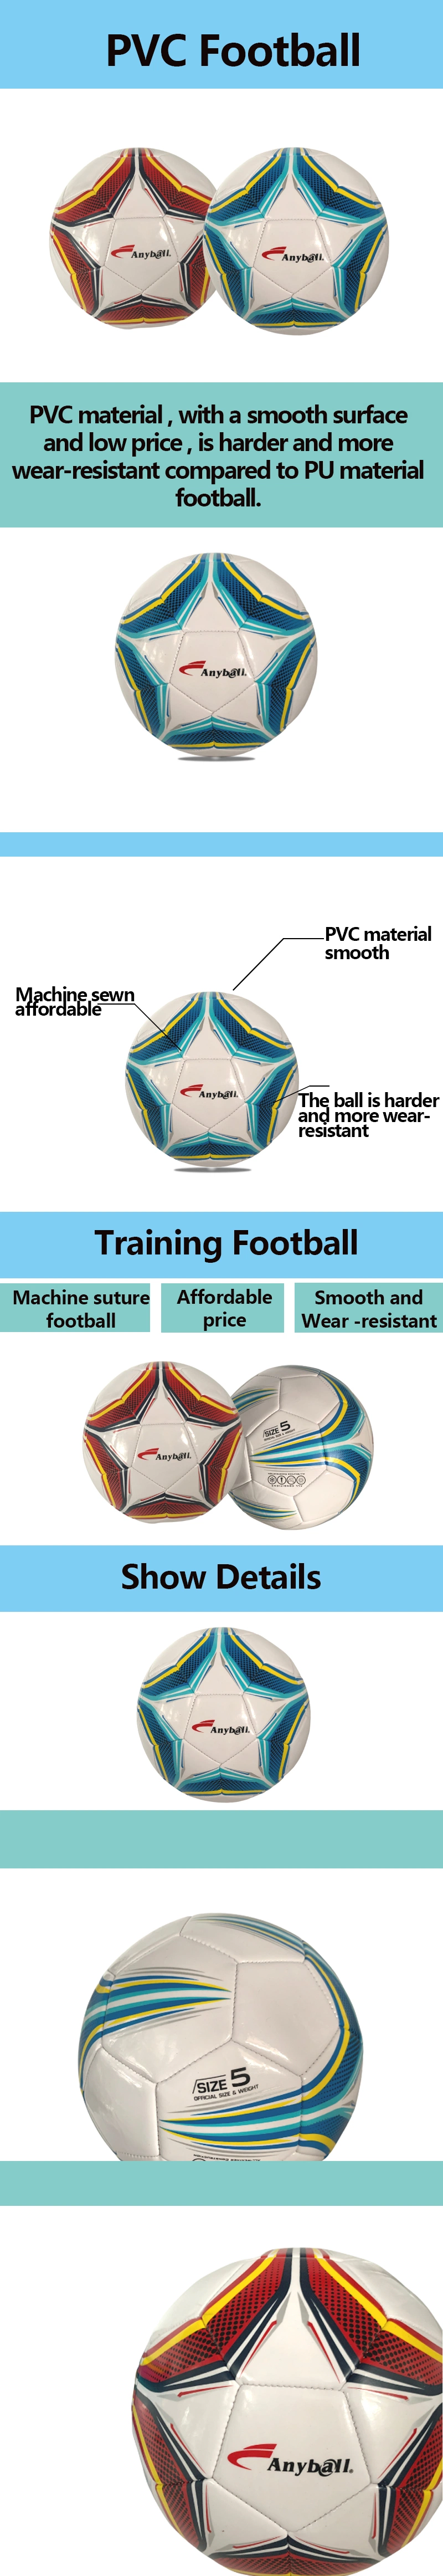 Footballs View Larger Imageadd to Comparesharepu / TPU / PVC Soccer Footballs Official Size 5 Diamond Panels Football Soccer Training / Competition Use Fo